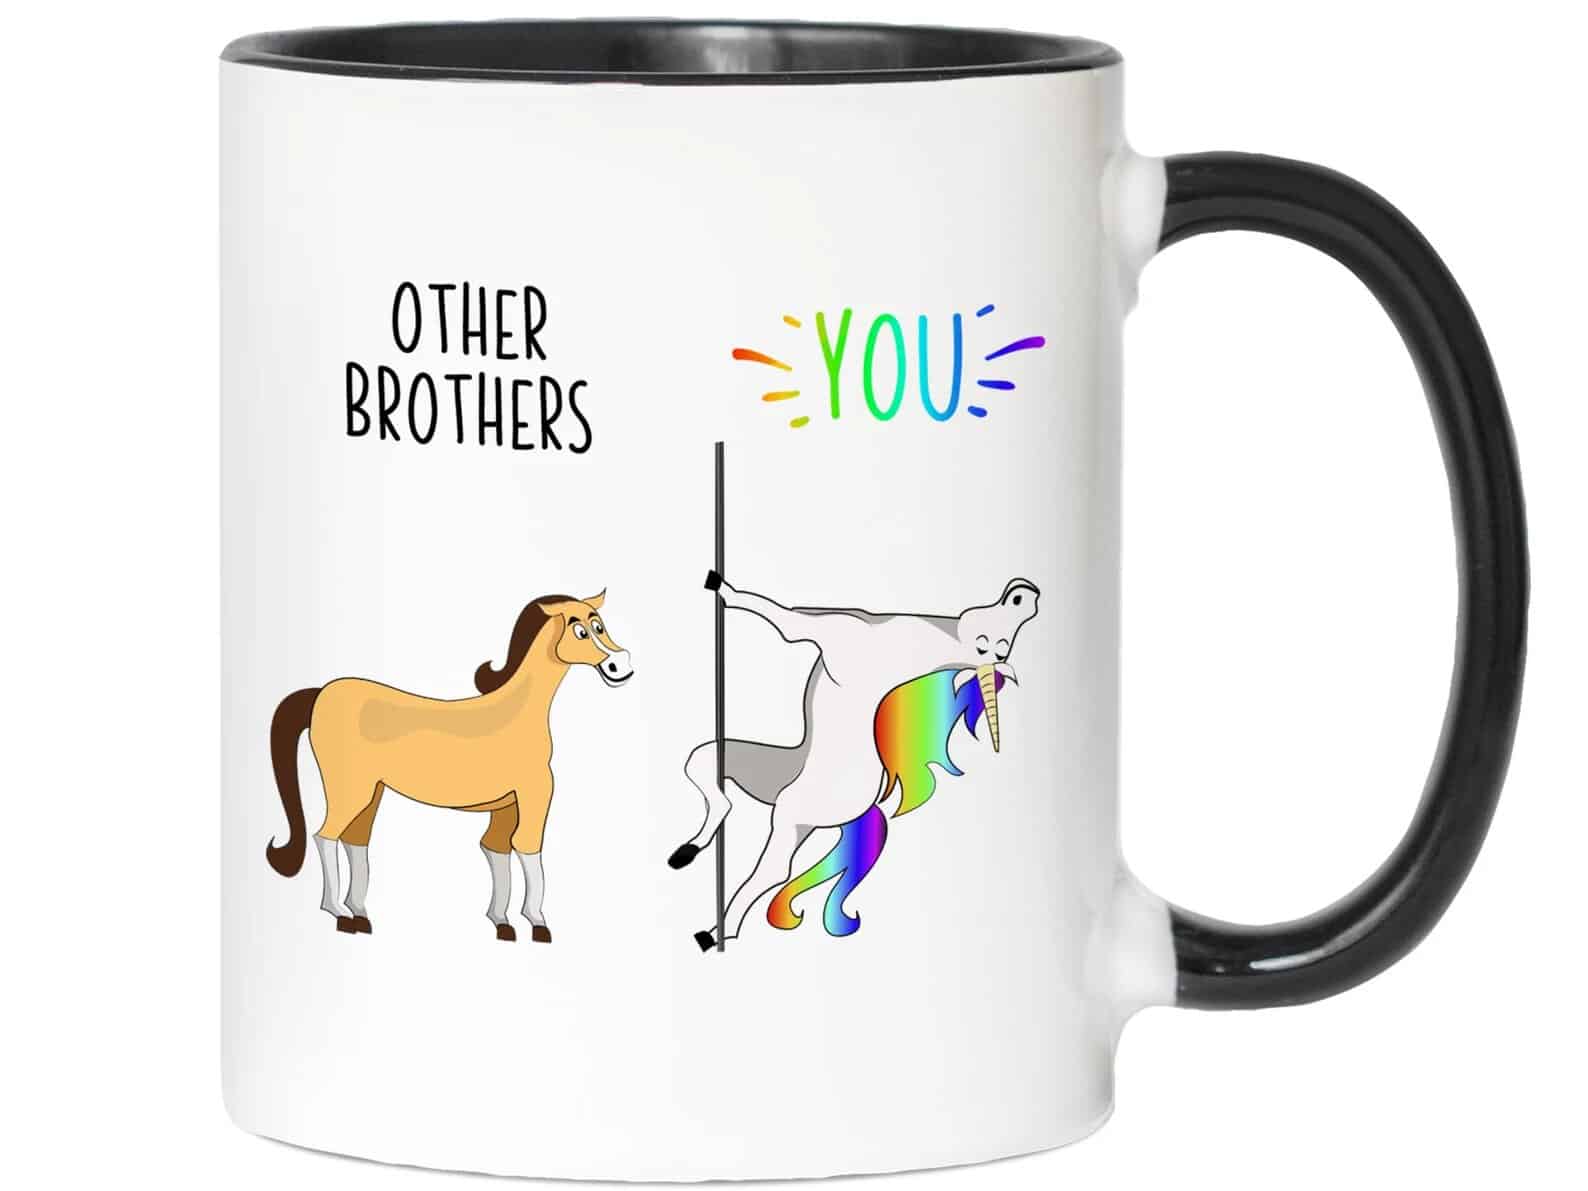 Gag Brother Gift: father's day gifts for brother
